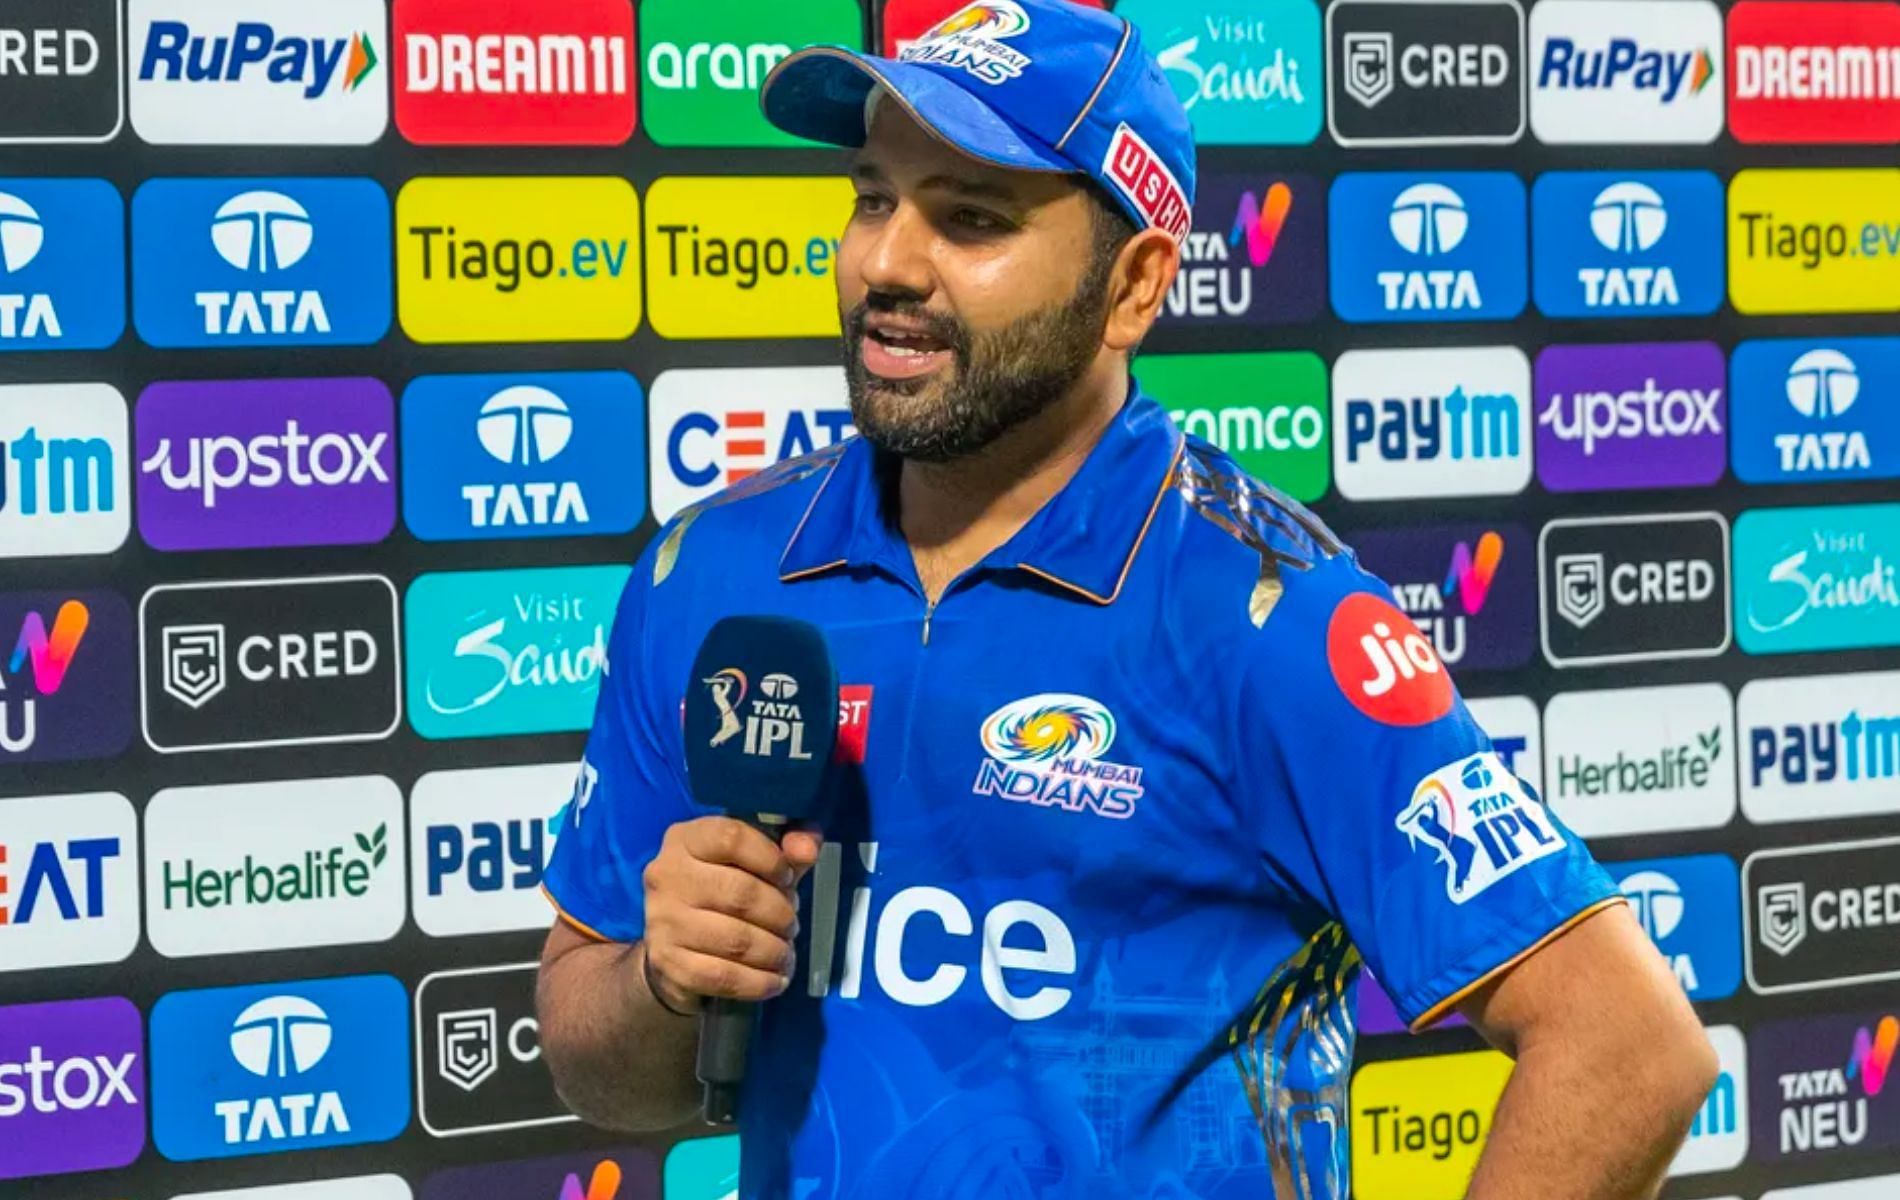 Rohit Sharma during a post-match interview. (Pic: IPLT20.com)